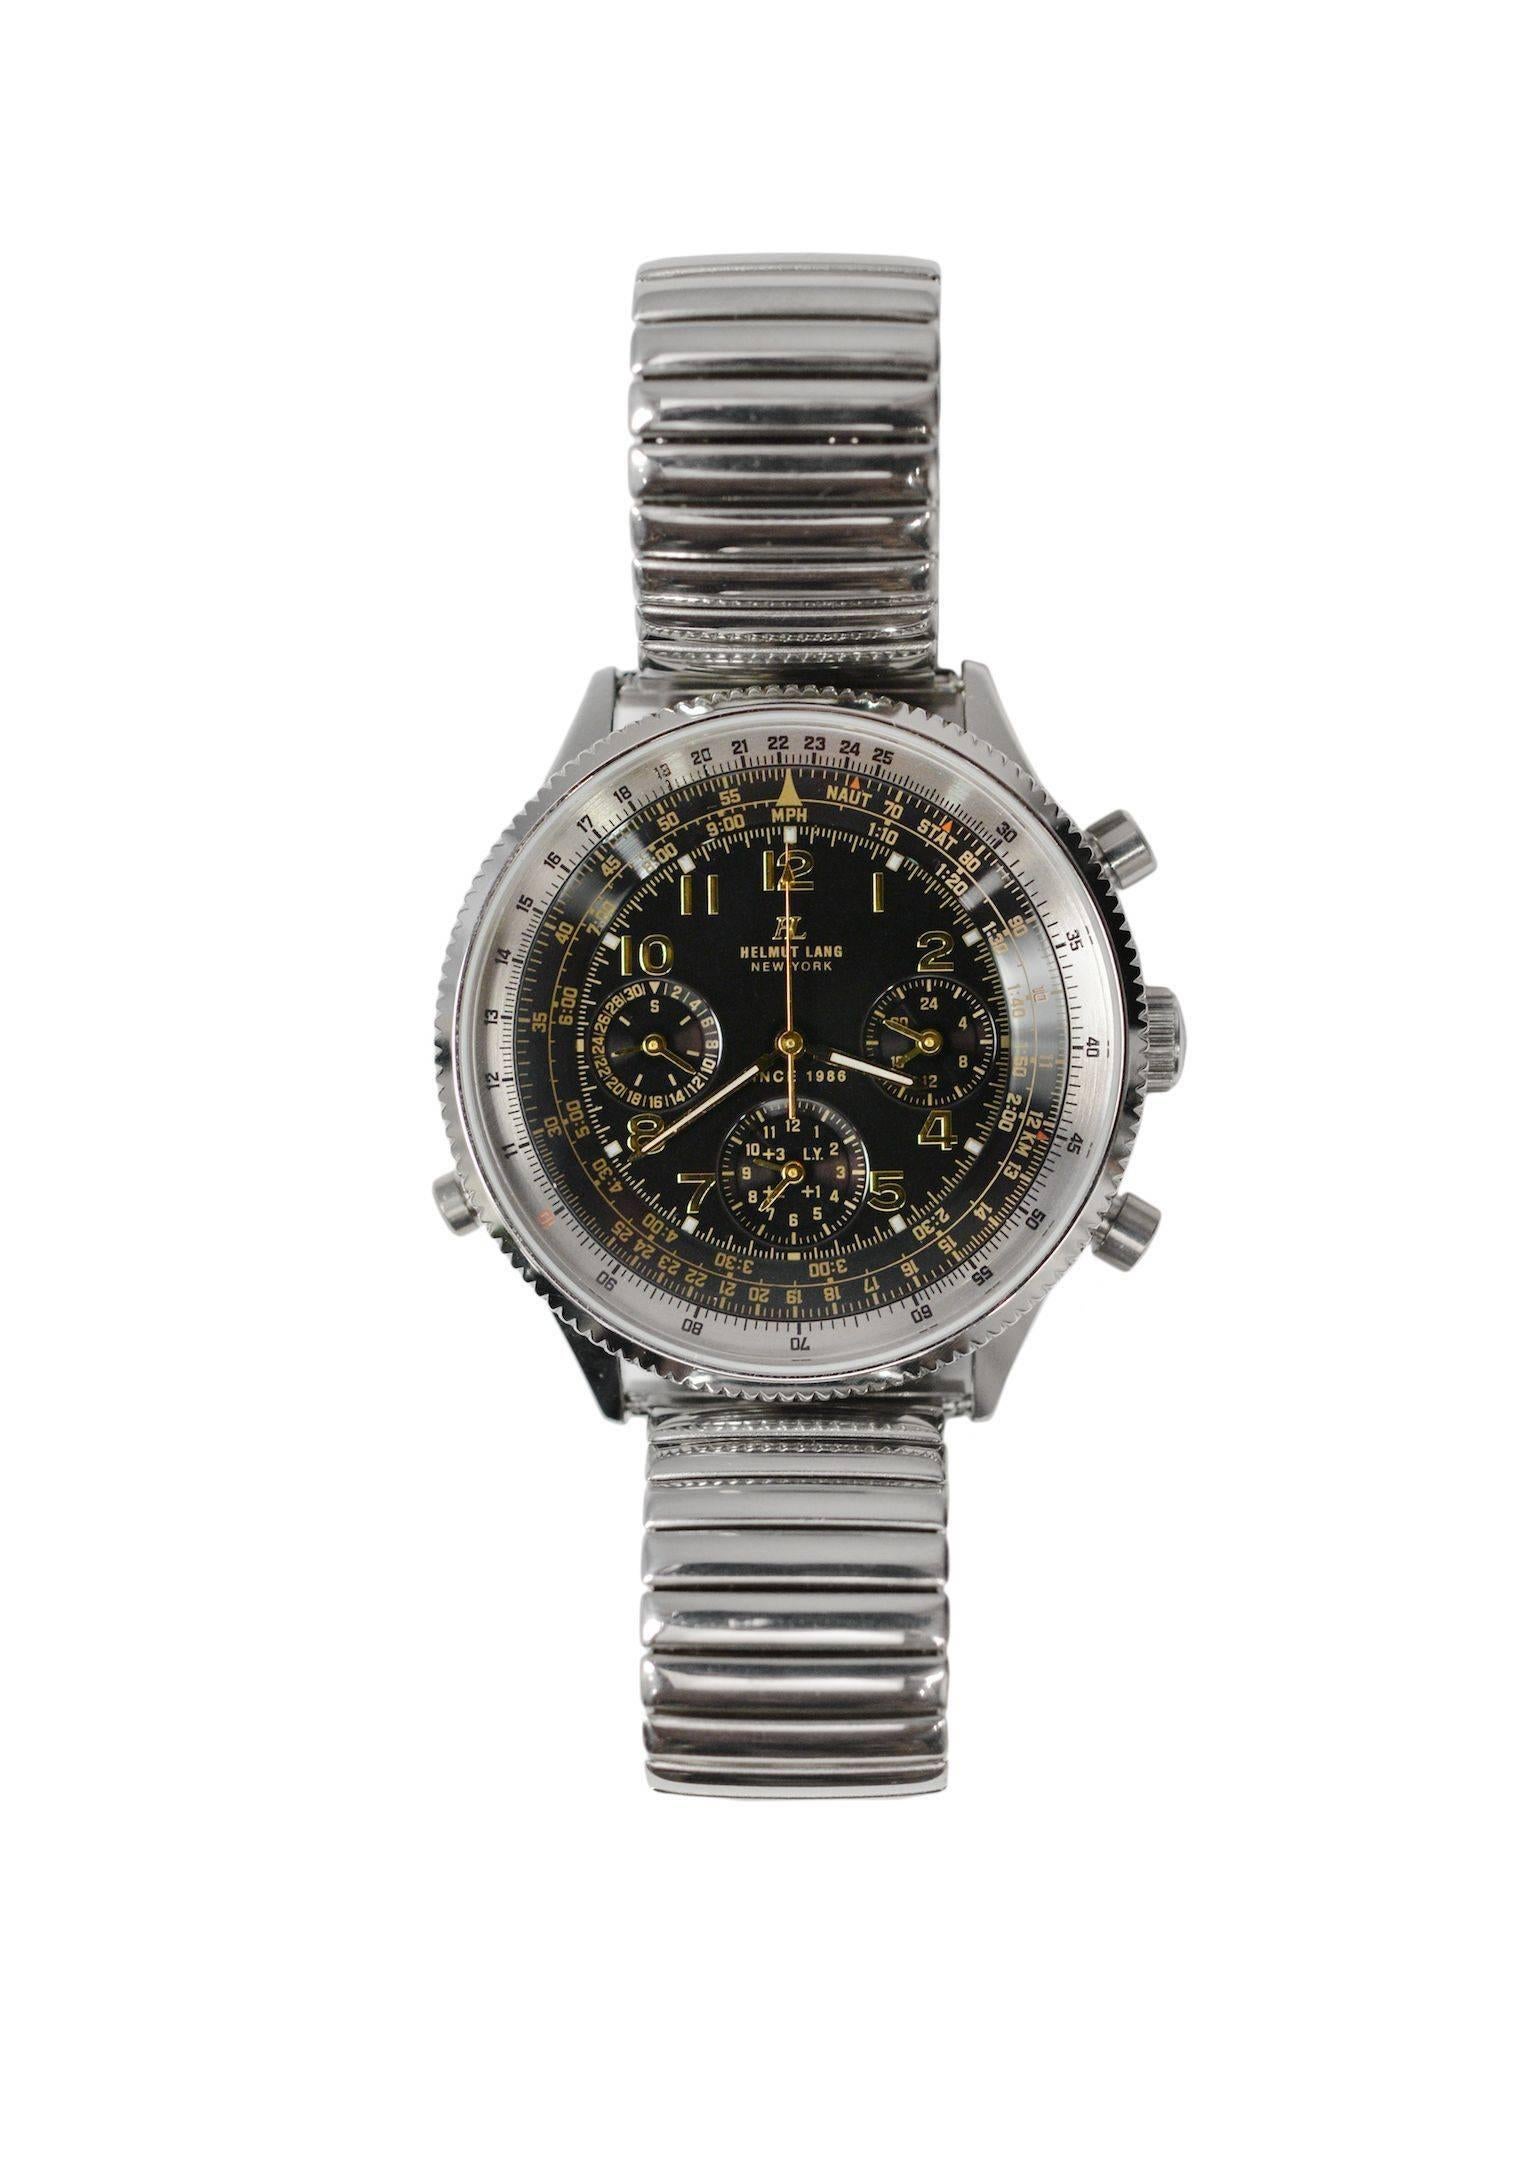 A very rare prototype / sample Helmut Lang chronograph watch, circa 2004. The watch was made in collaboration for Helmut Lang by Citizen. The Helmut Lang "Time" collection was only sold at a few select locations and not made for mass